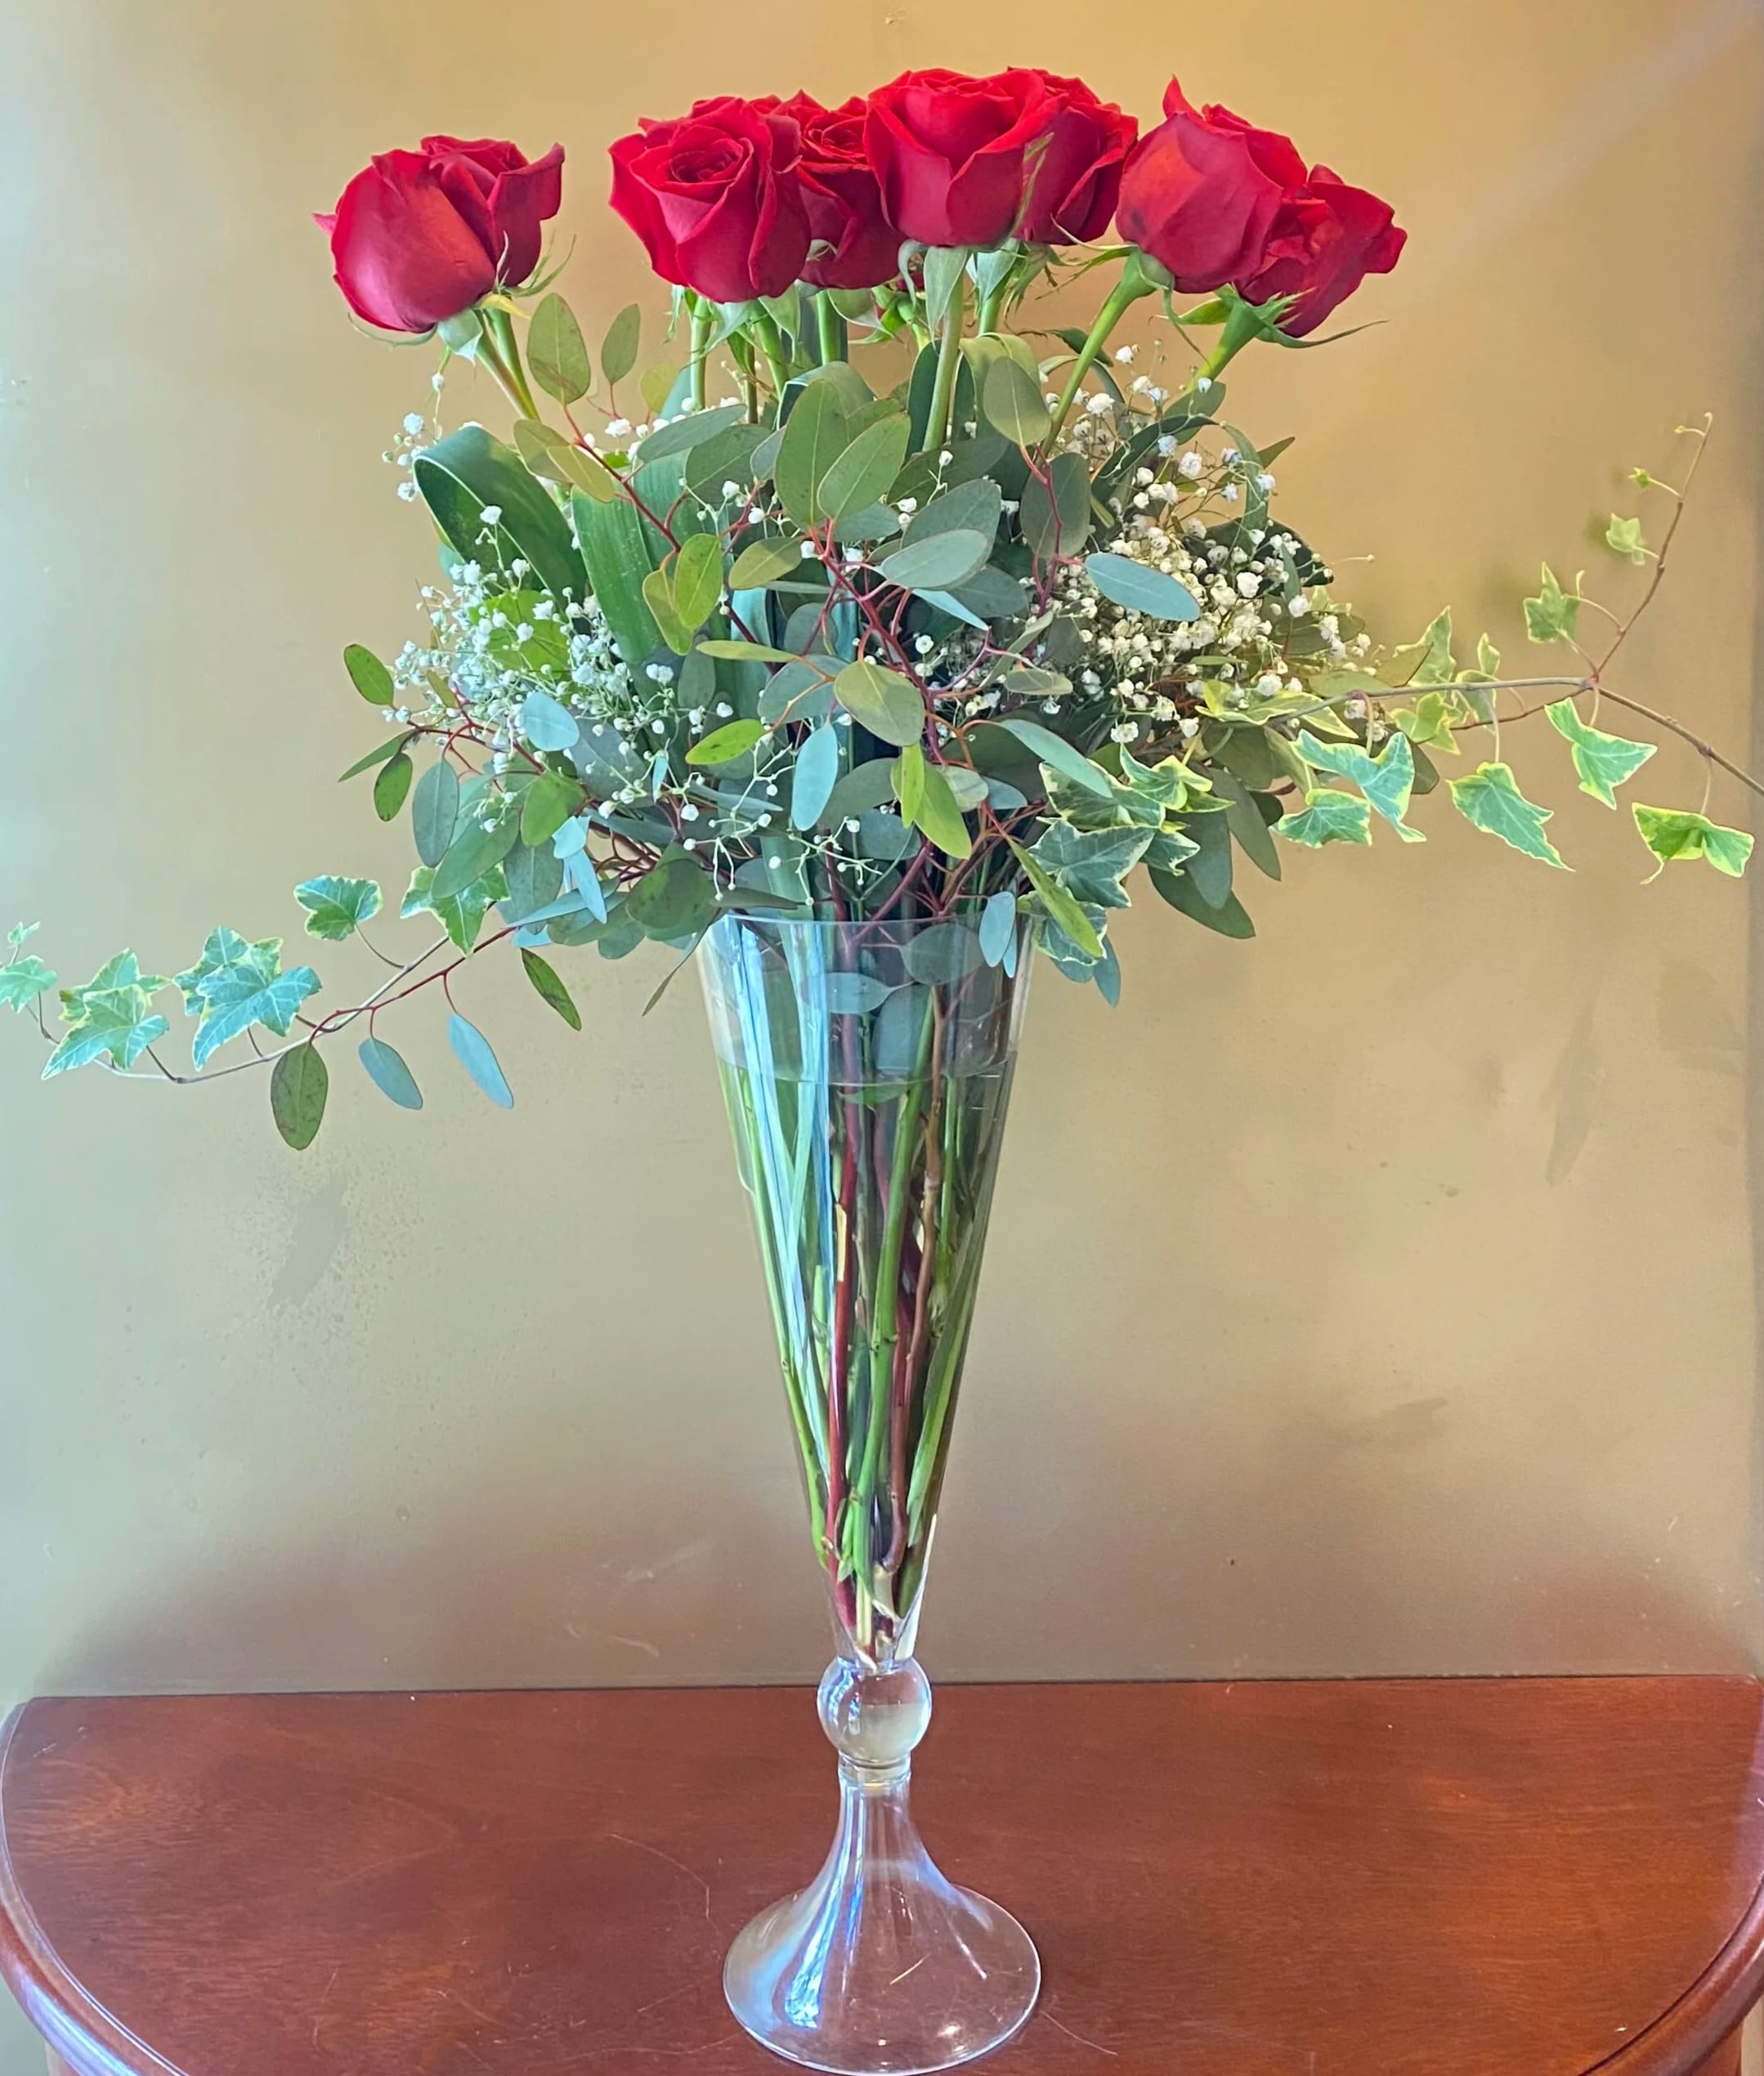 Dreaming in Red - A vase full of vibrant hot pink roses, hand-arranged with ivy and other garden greens is delivered.